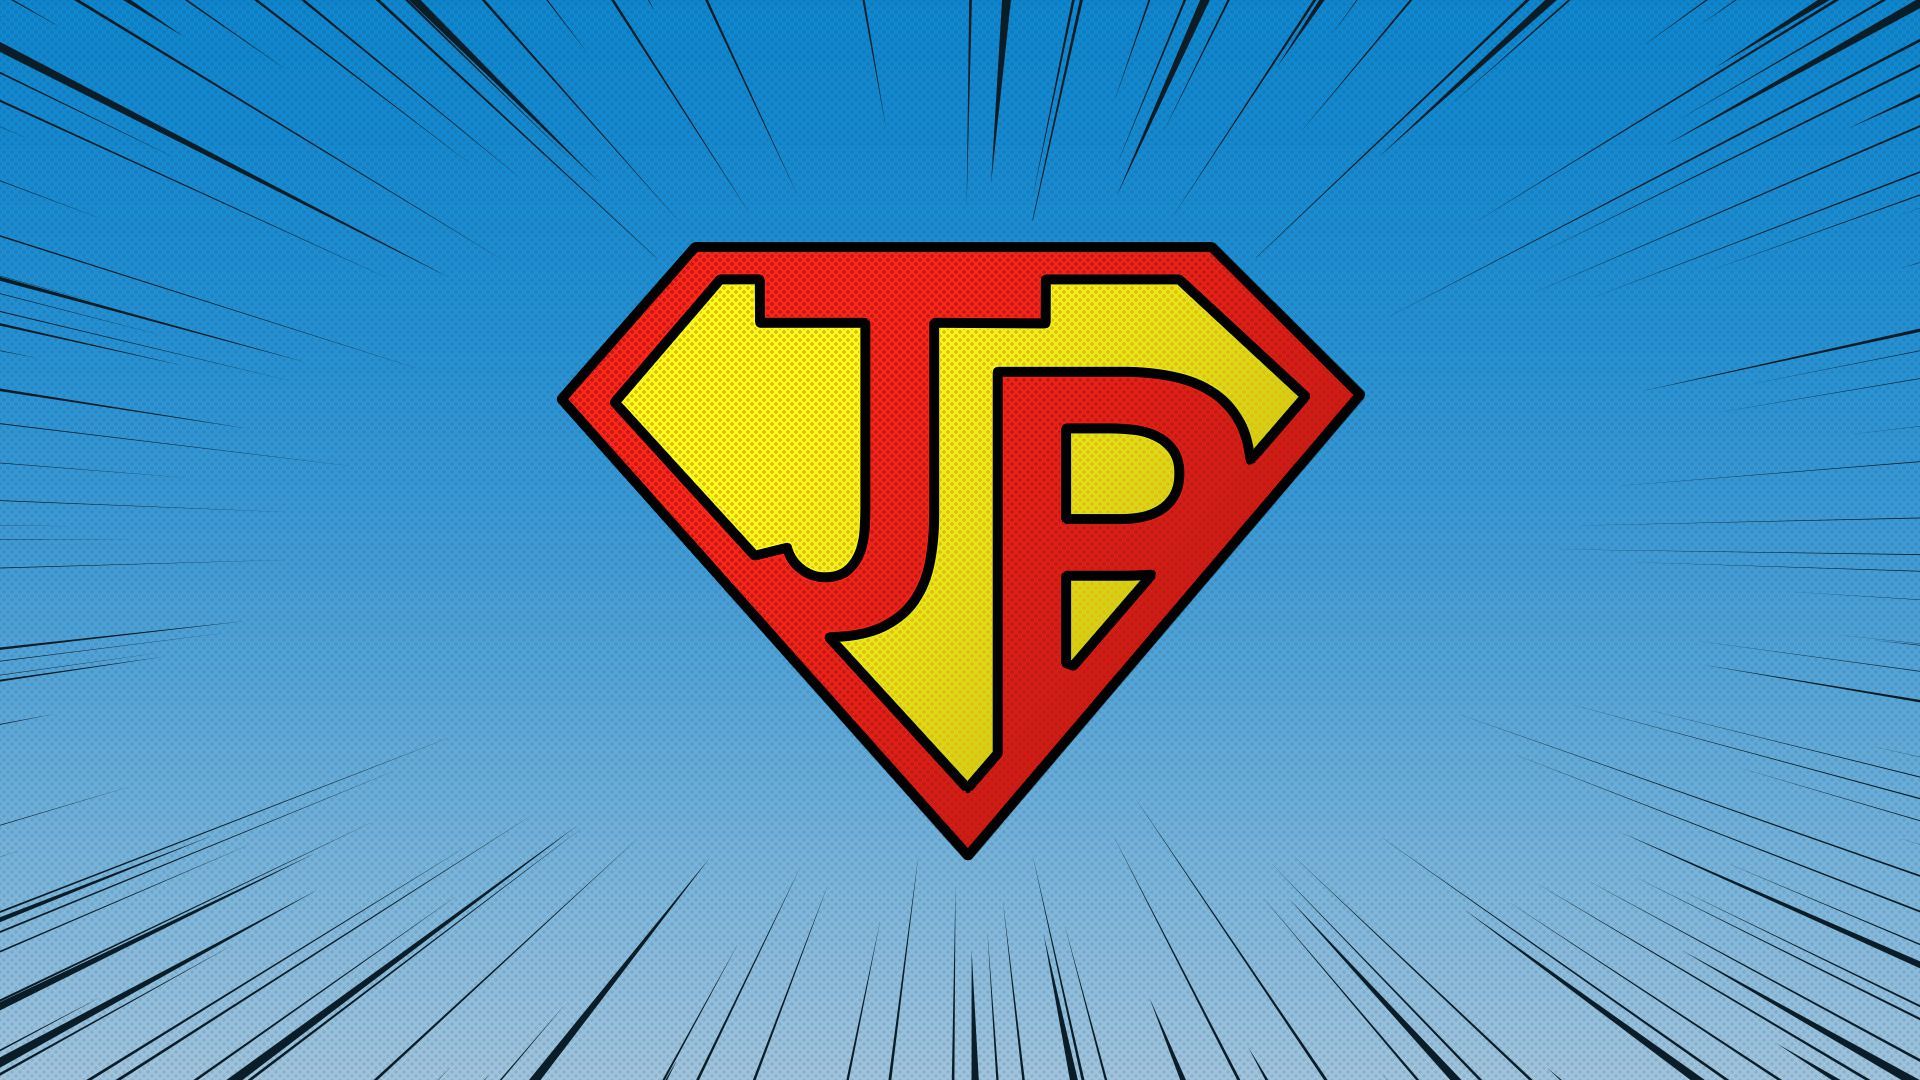 Illustration of initials J and P done in the style of the Superman logo.